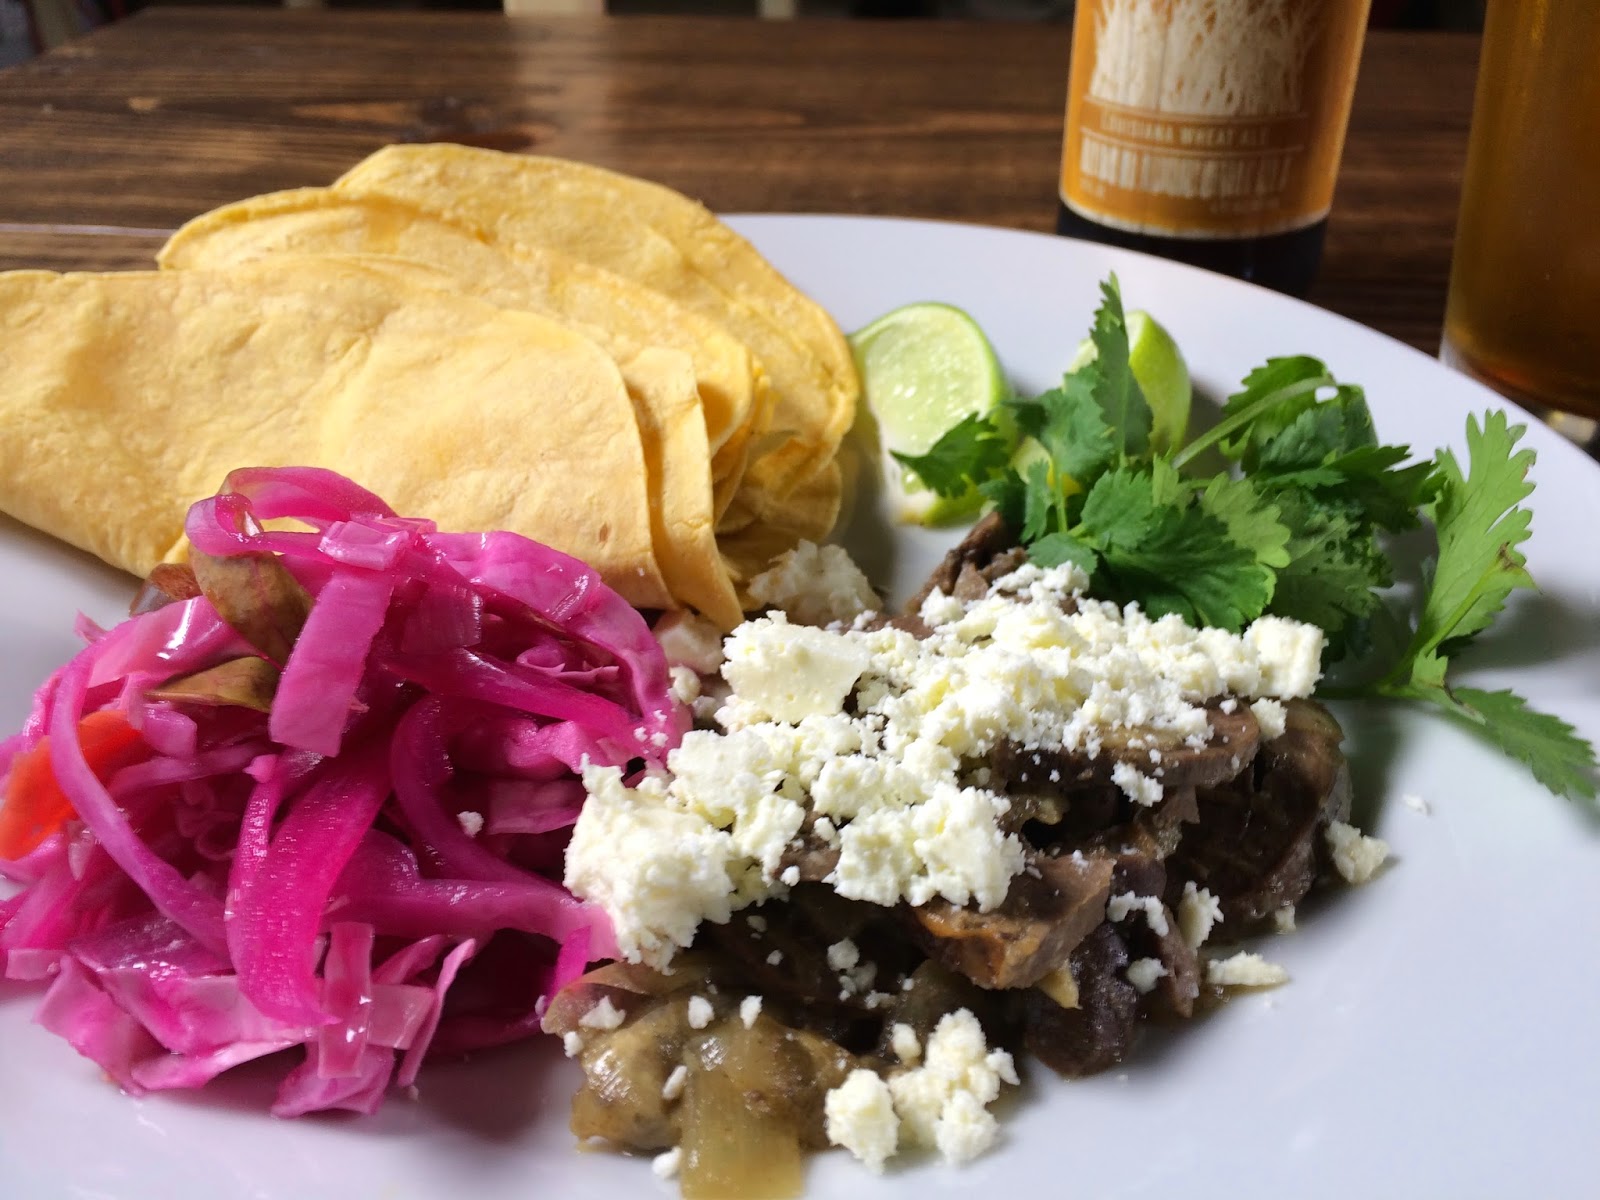 Braised Heart Taco: Slow Cooked Lamb Heart, Cilantro, Curtido, Lime, and Feta. Pictured with a Parish Brewing Co. Canebrake.